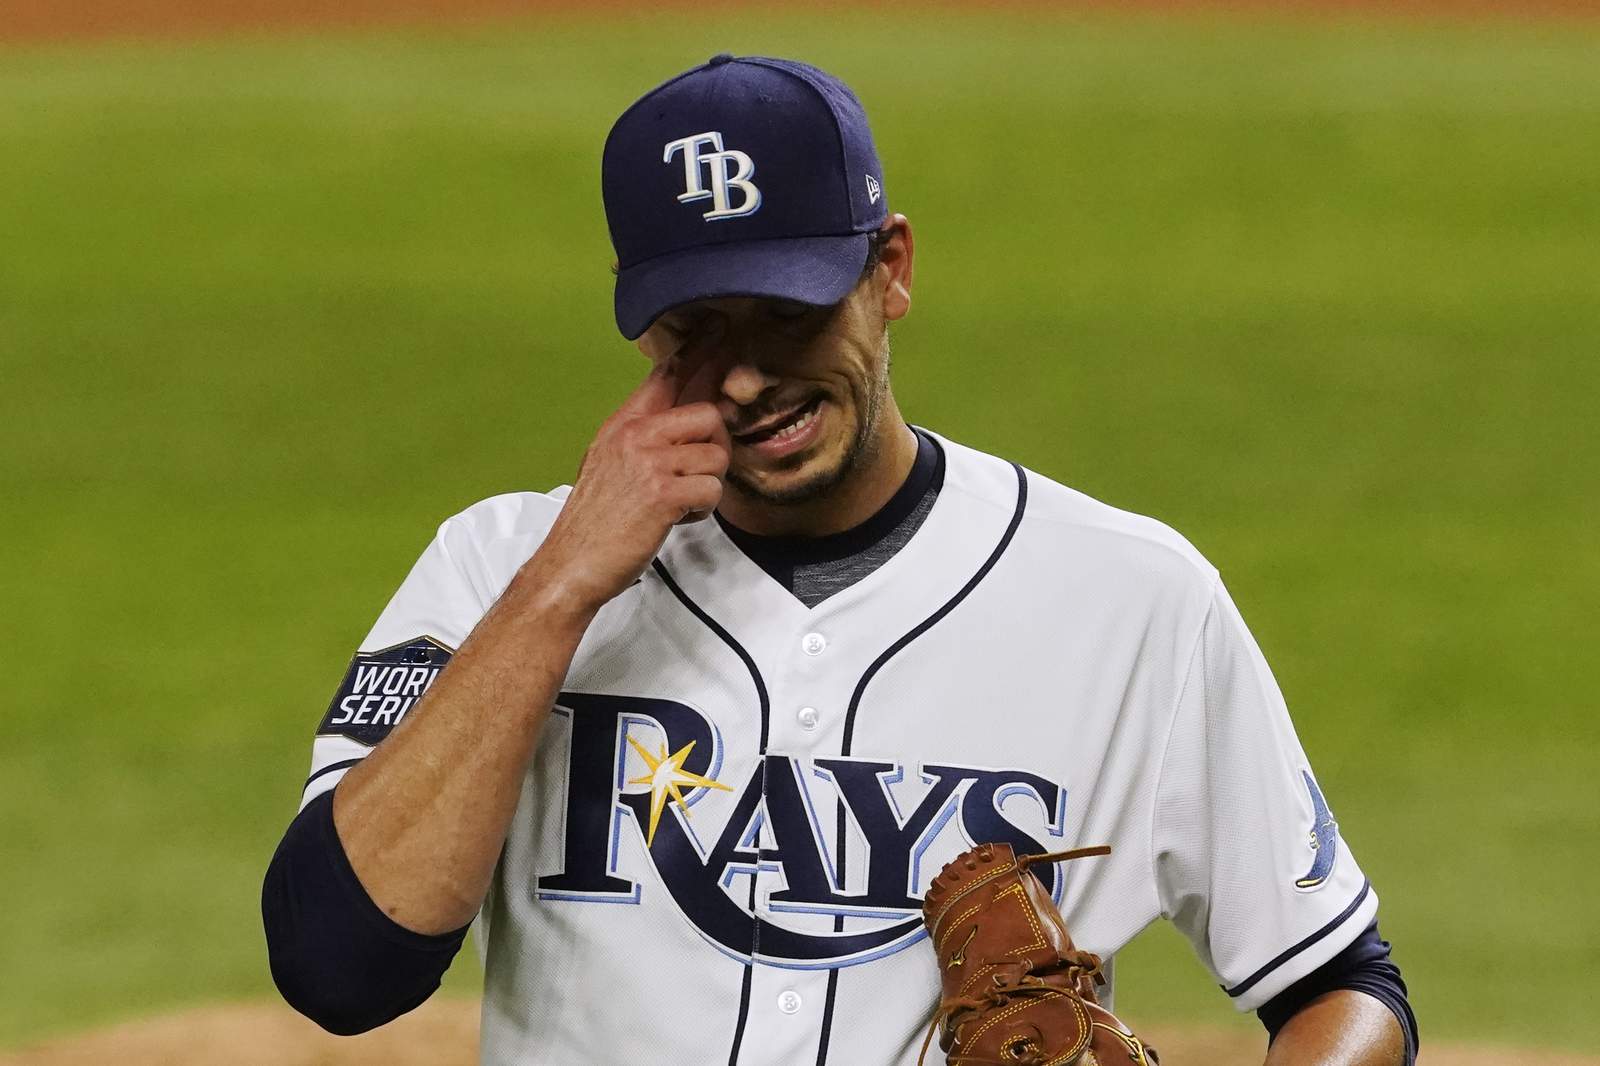 Morton merely mortal for Rays, question becomes what's next